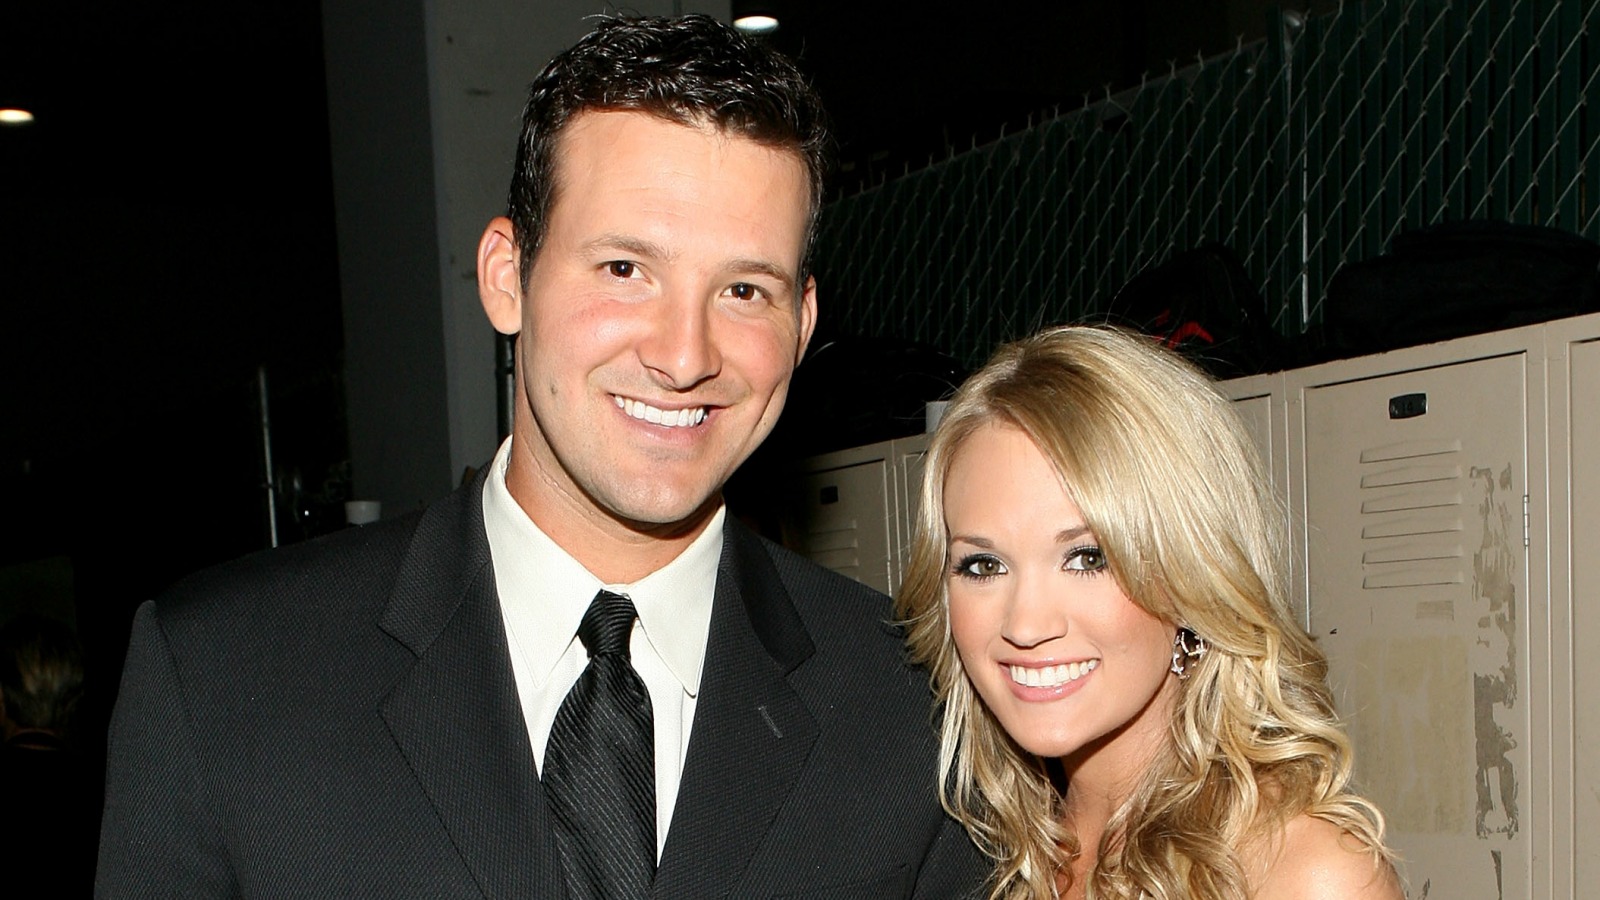 The Real Reason Carrie Underwood And Tony Romo Broke Up.